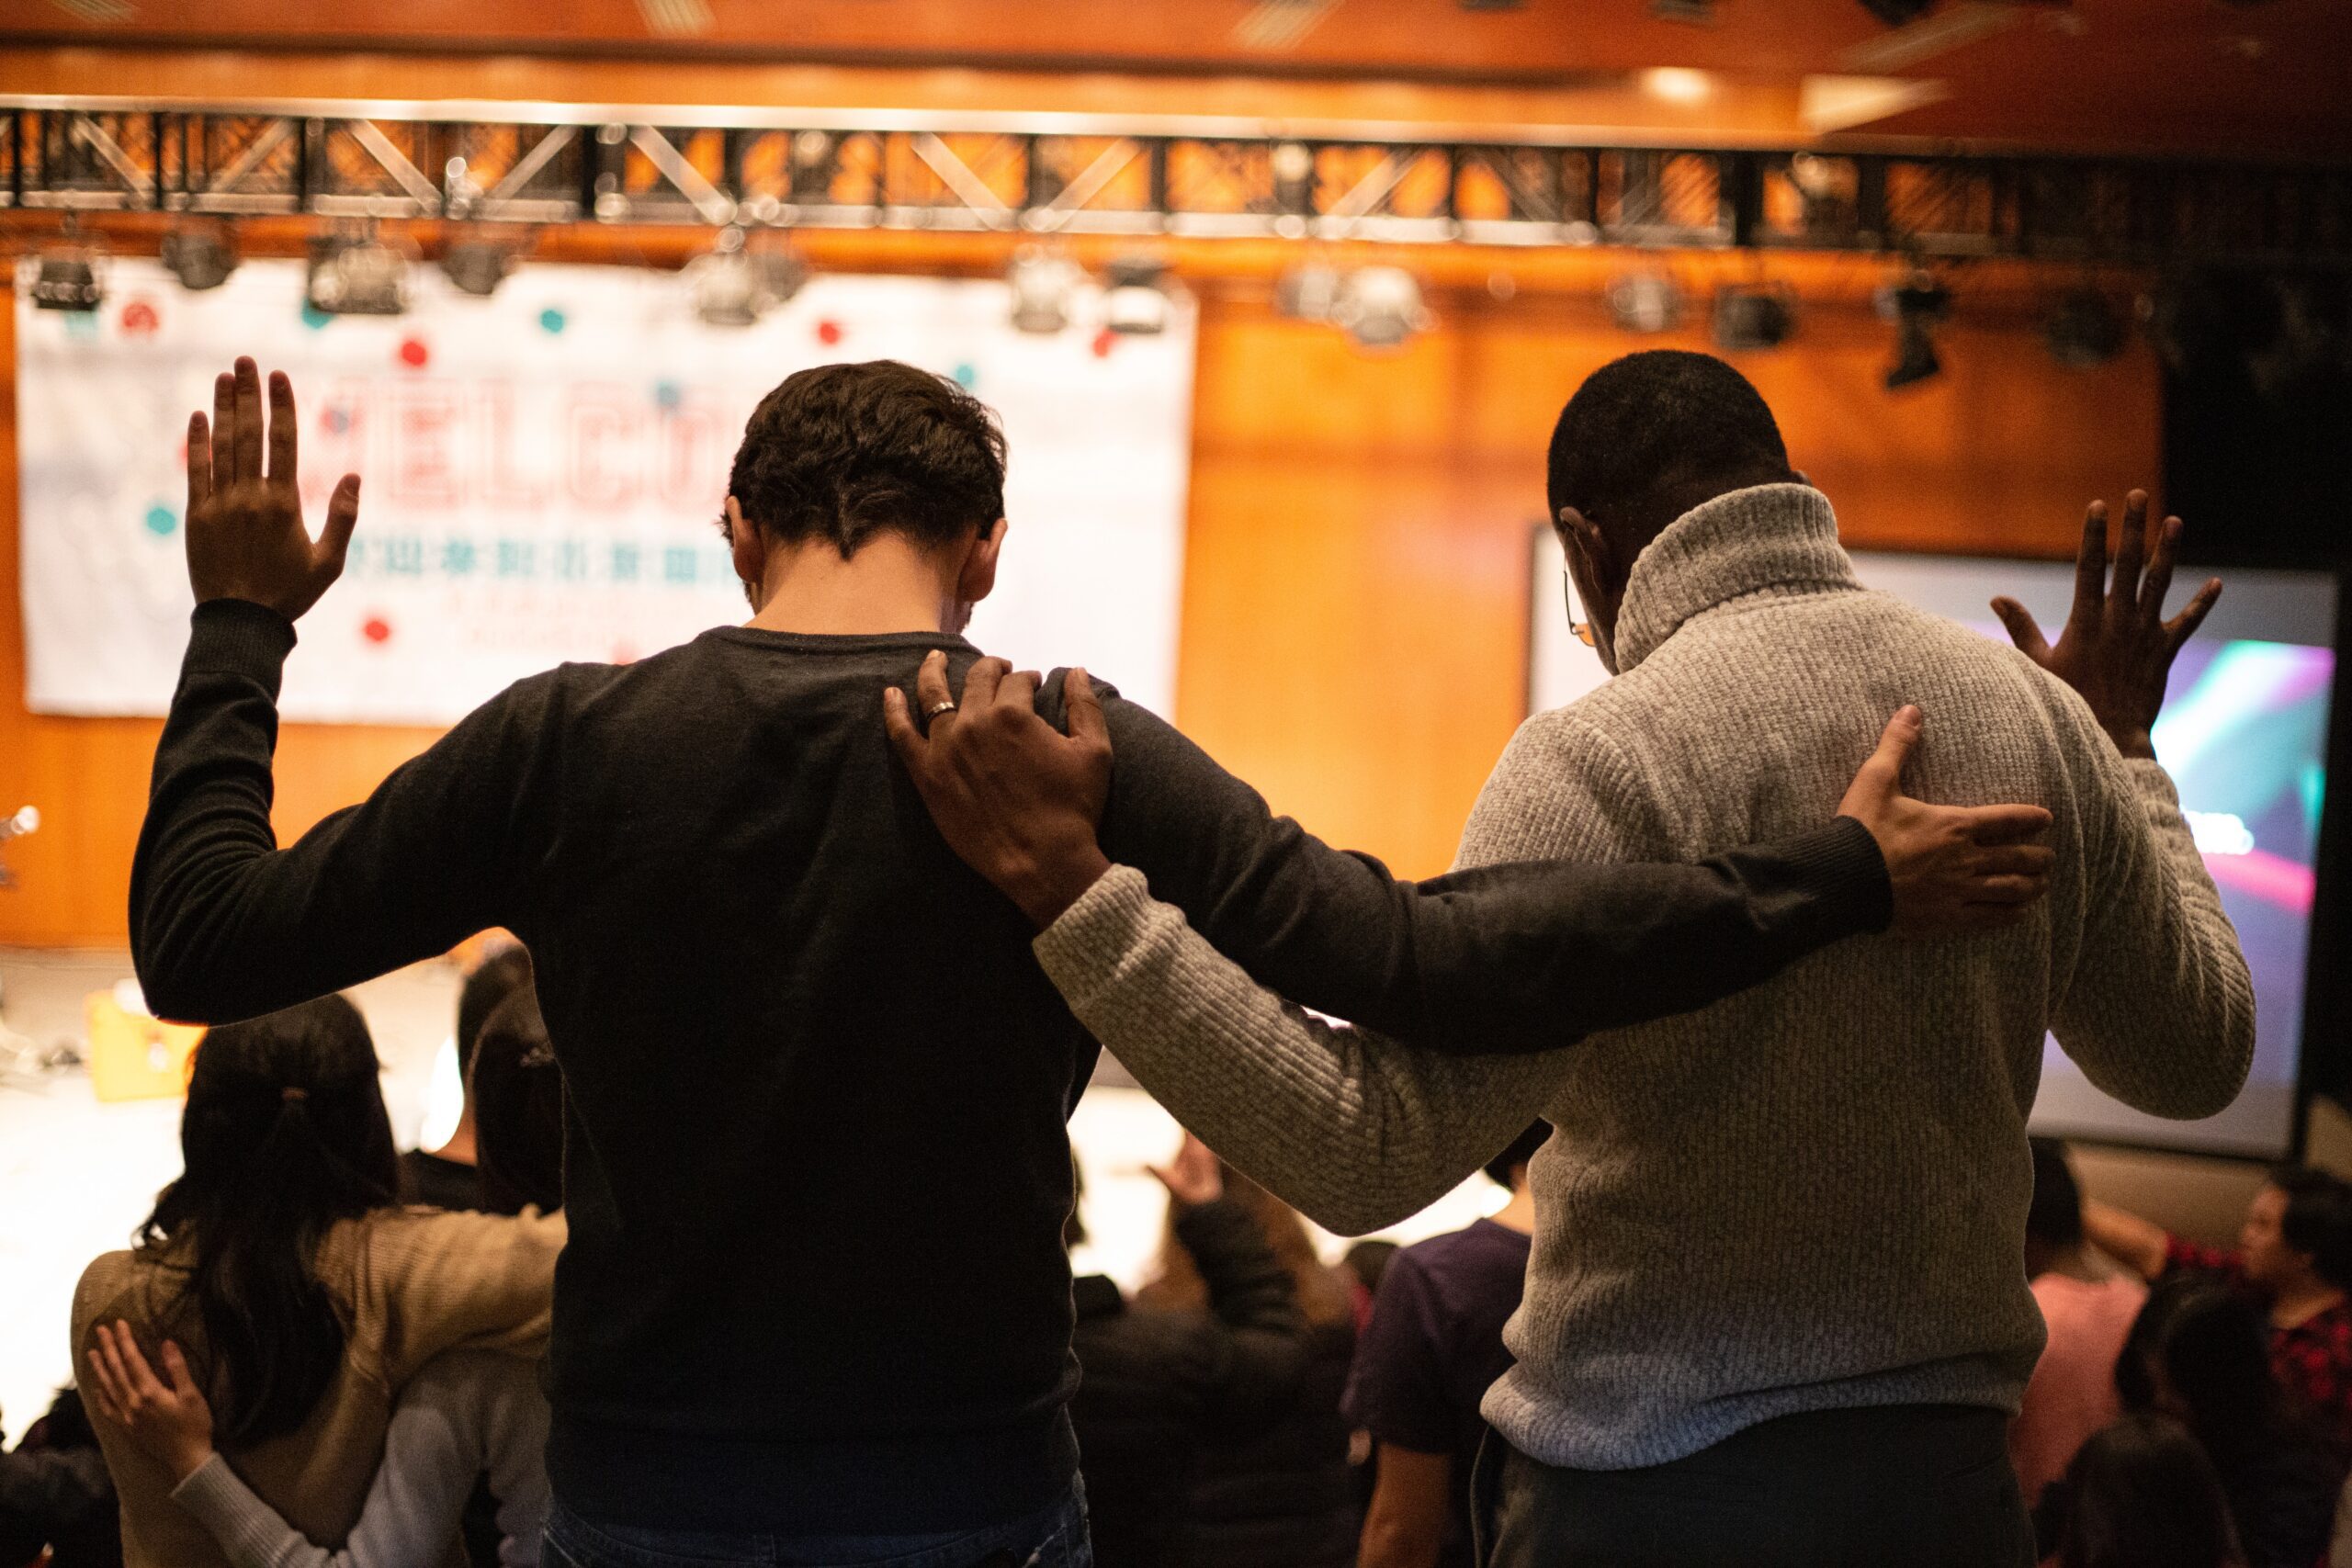 two men praying together at an event